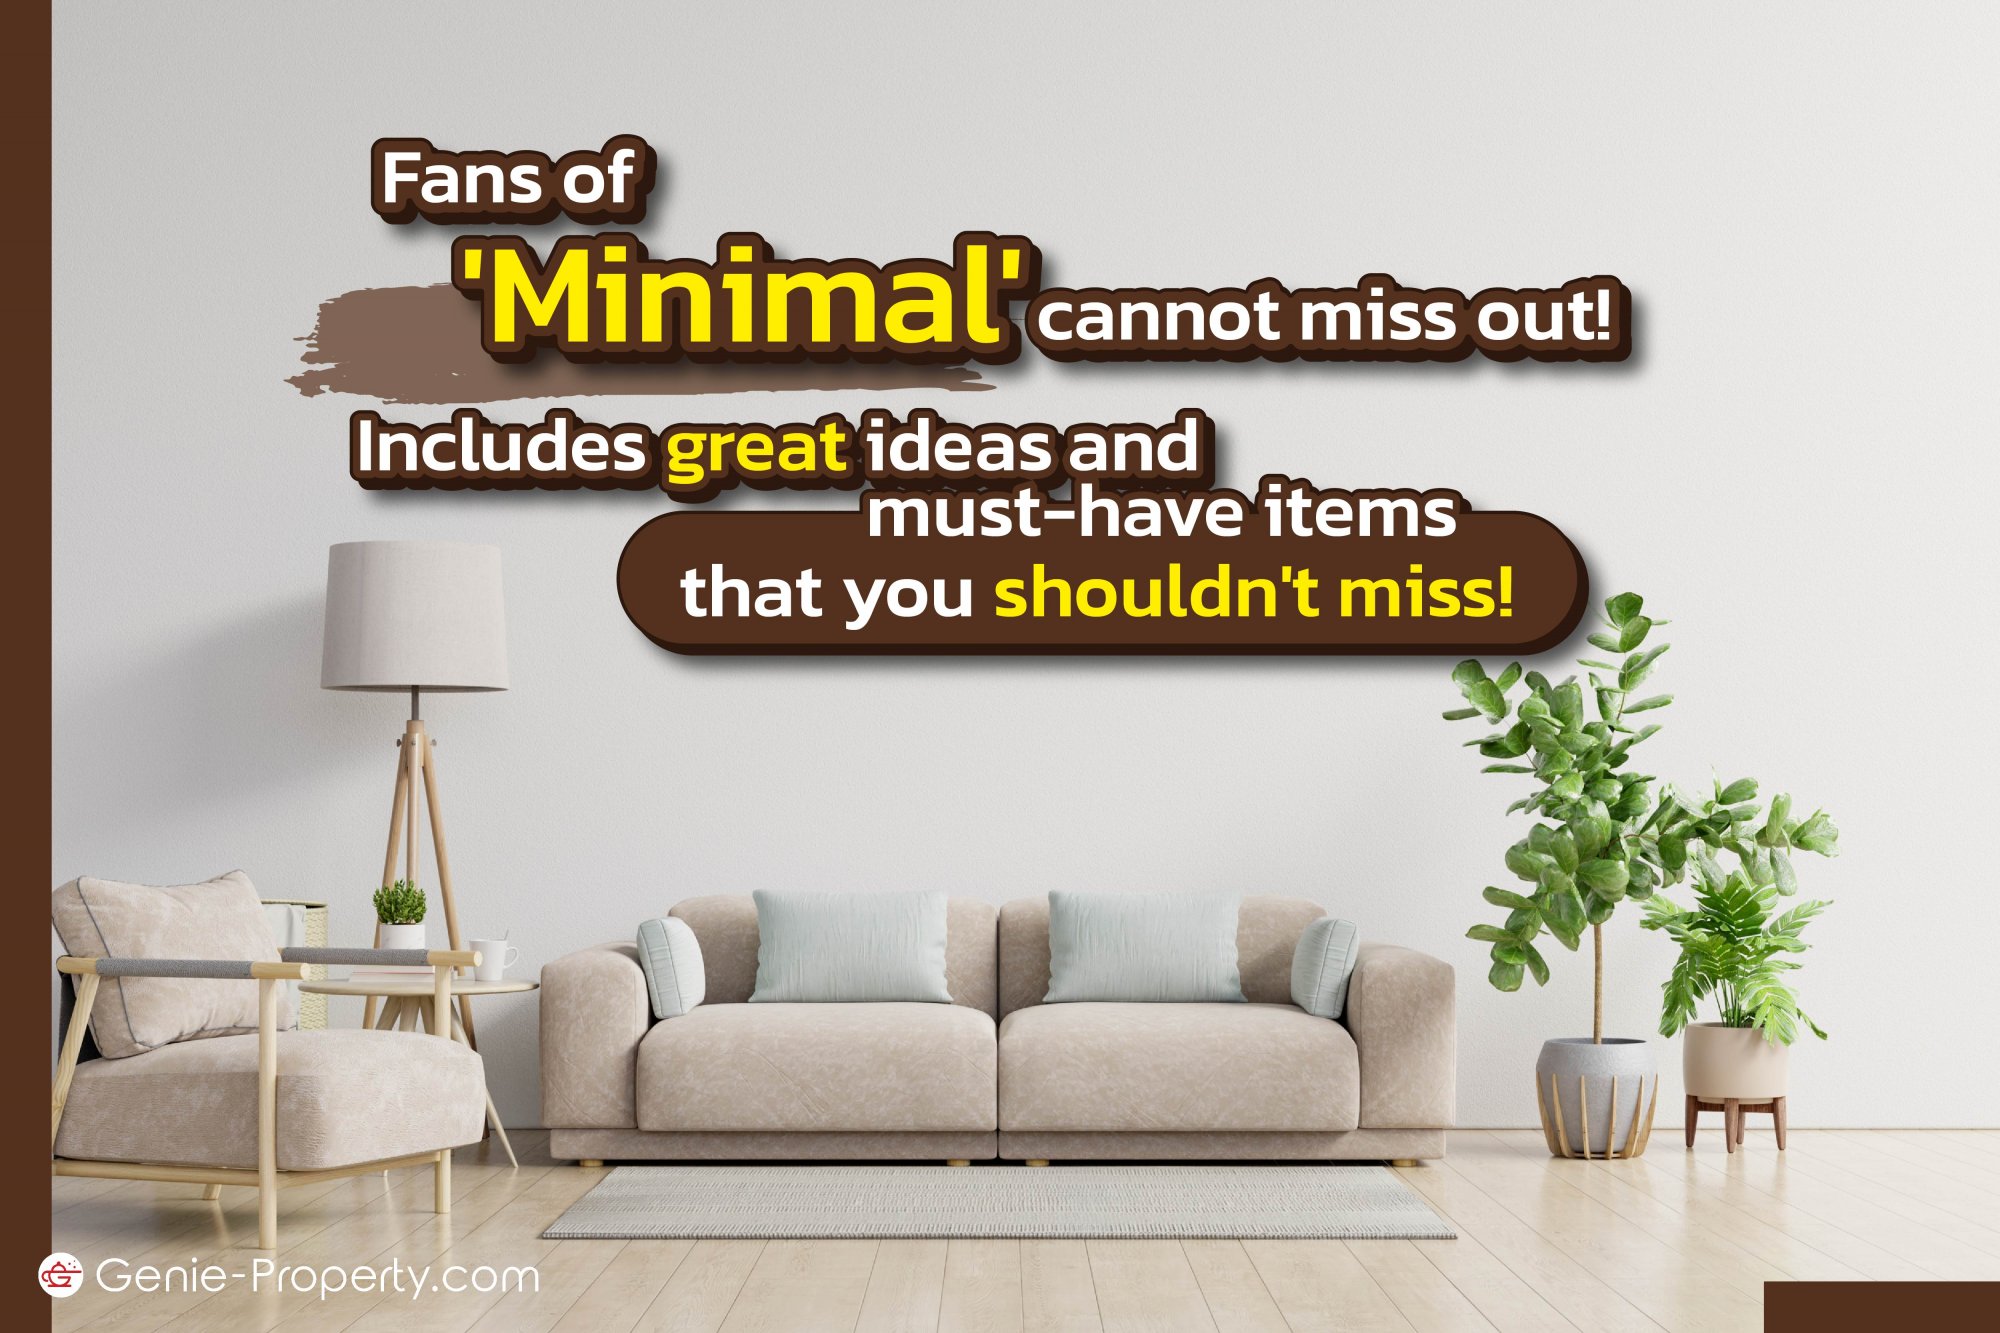 image for Fans of 'Minimal' cannot miss out! Includes great ideas and must-have items that you shouldn't miss!